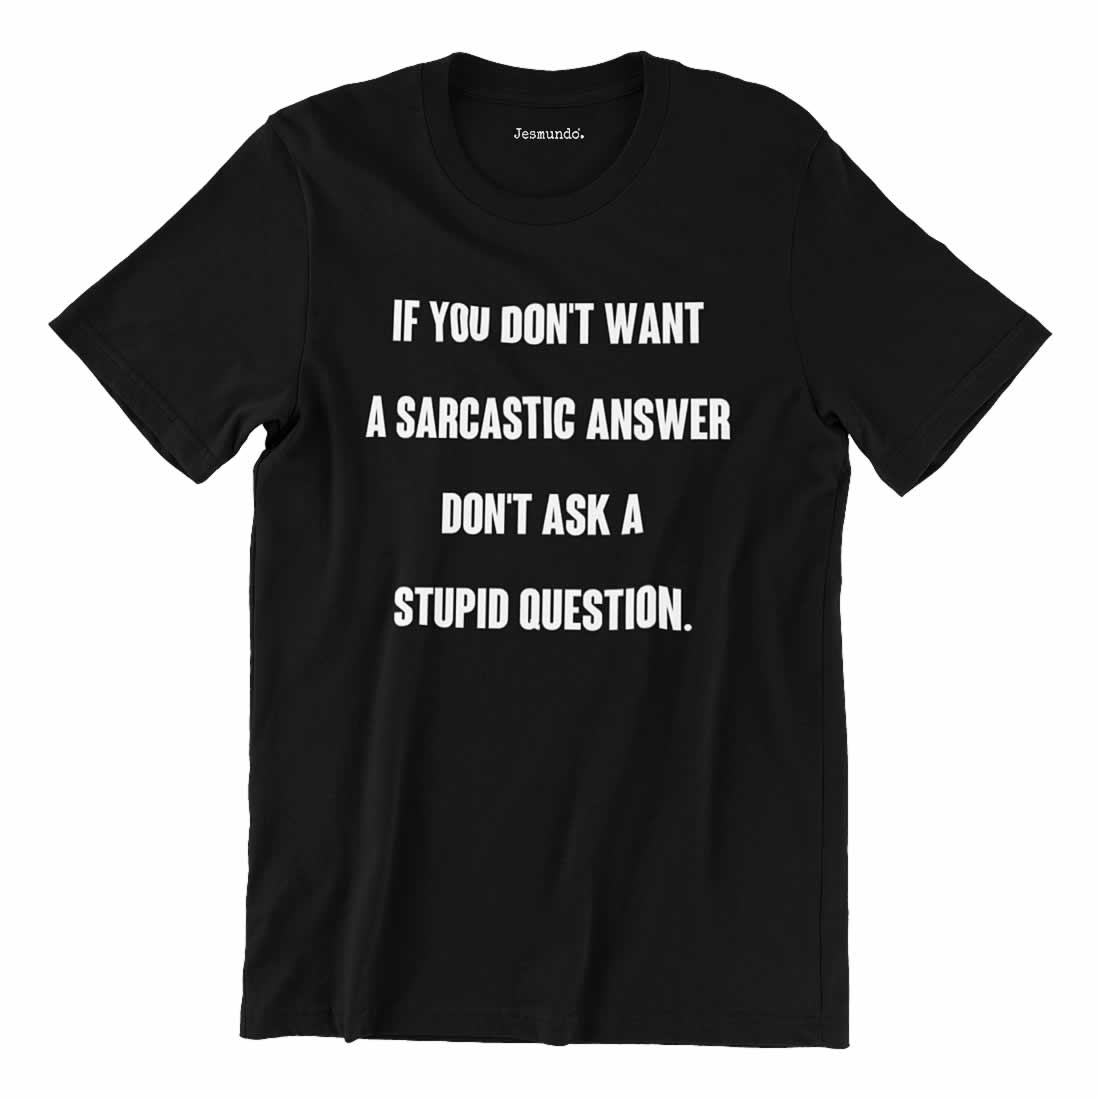 If you don't want a sarcastic answer don't ask a stupid question t-shirt